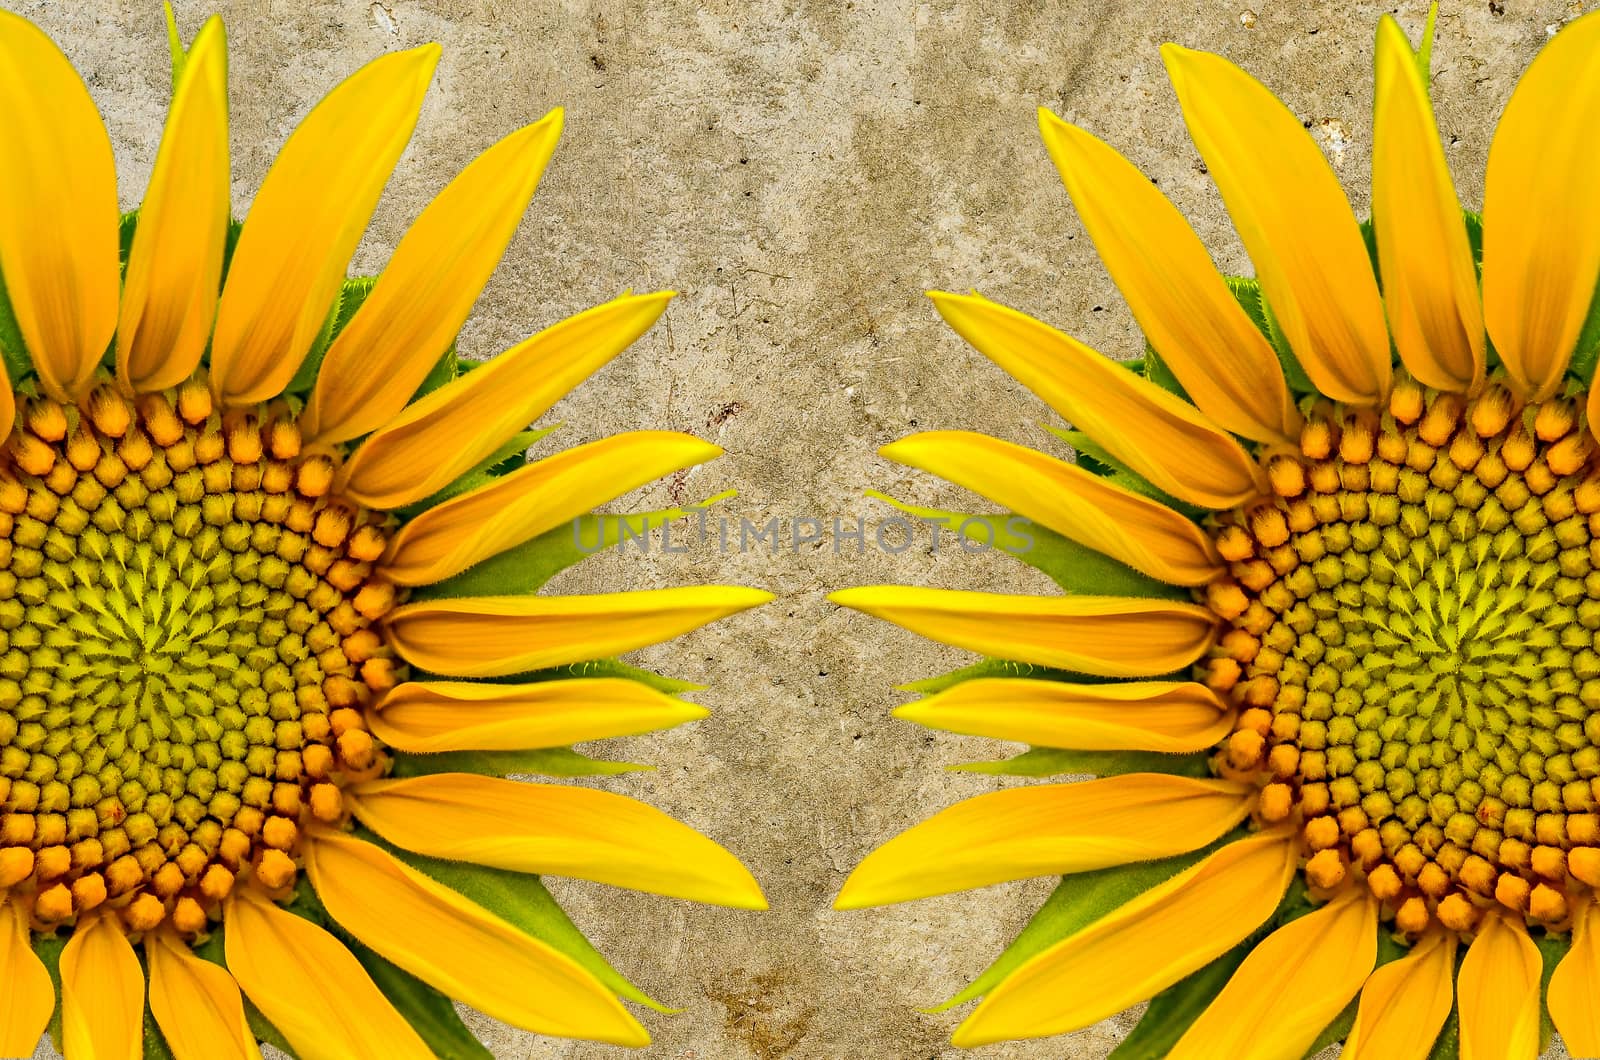 Two sunflower closeup on cement  background